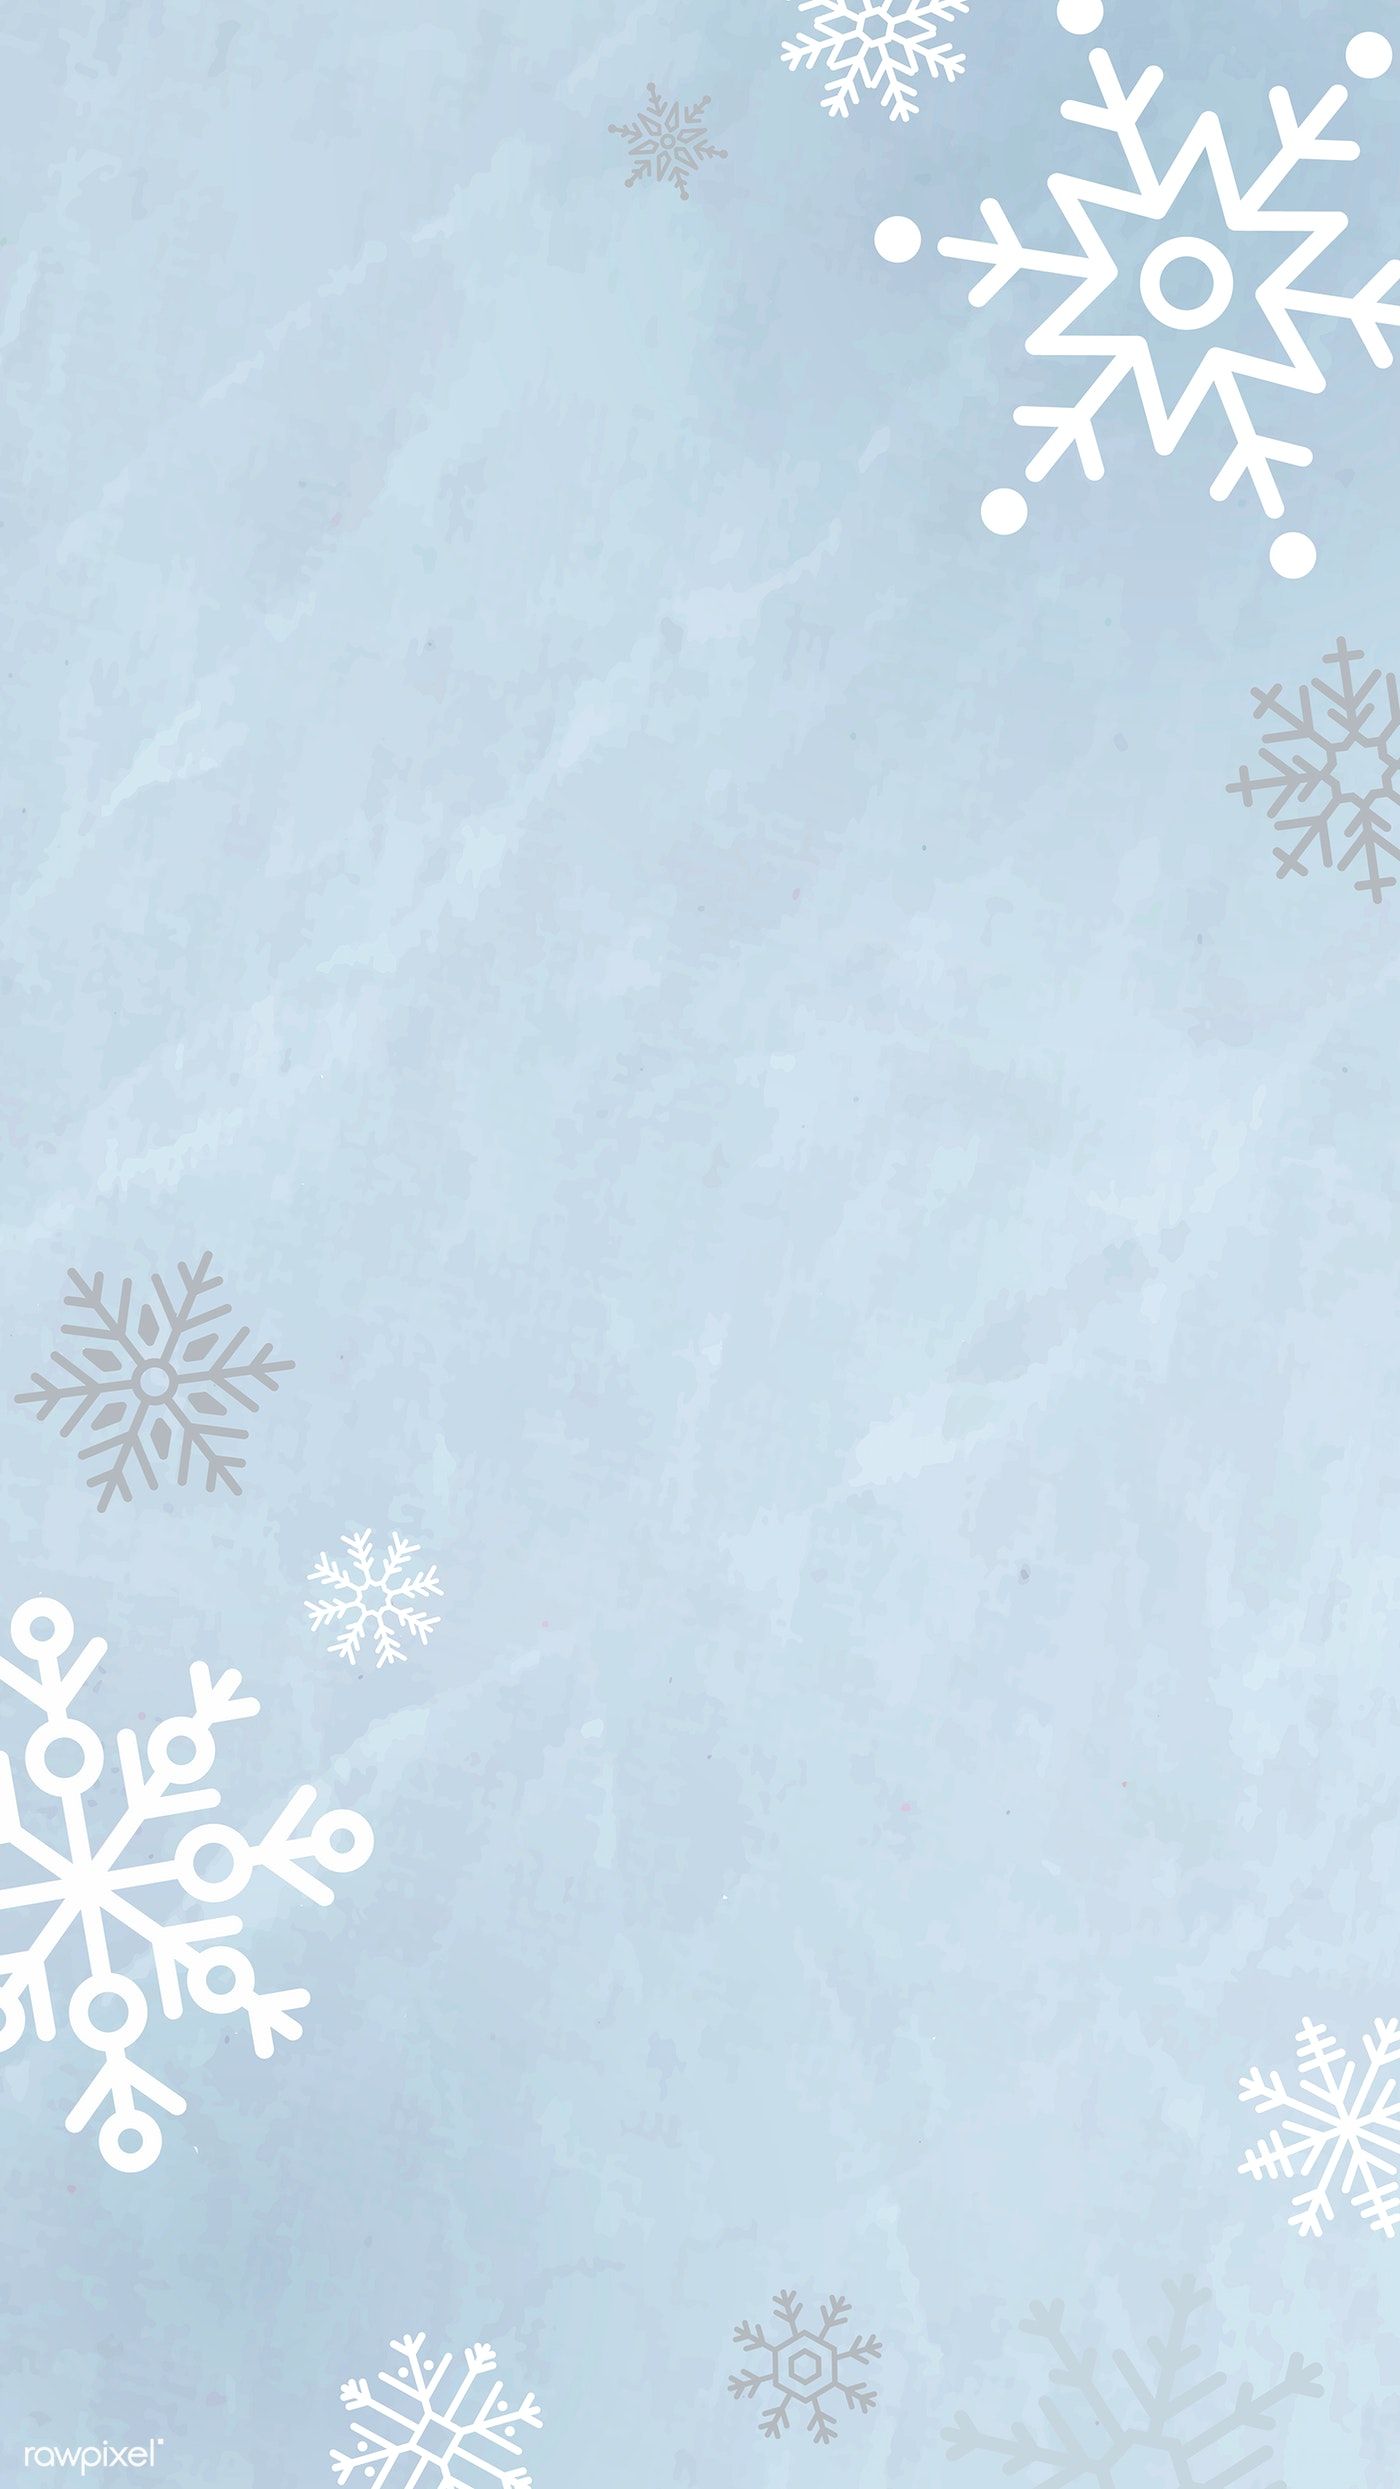 Aesthetic winter background with snowflakes on a blue watercolor background. Vector illustration.  - Snowflake